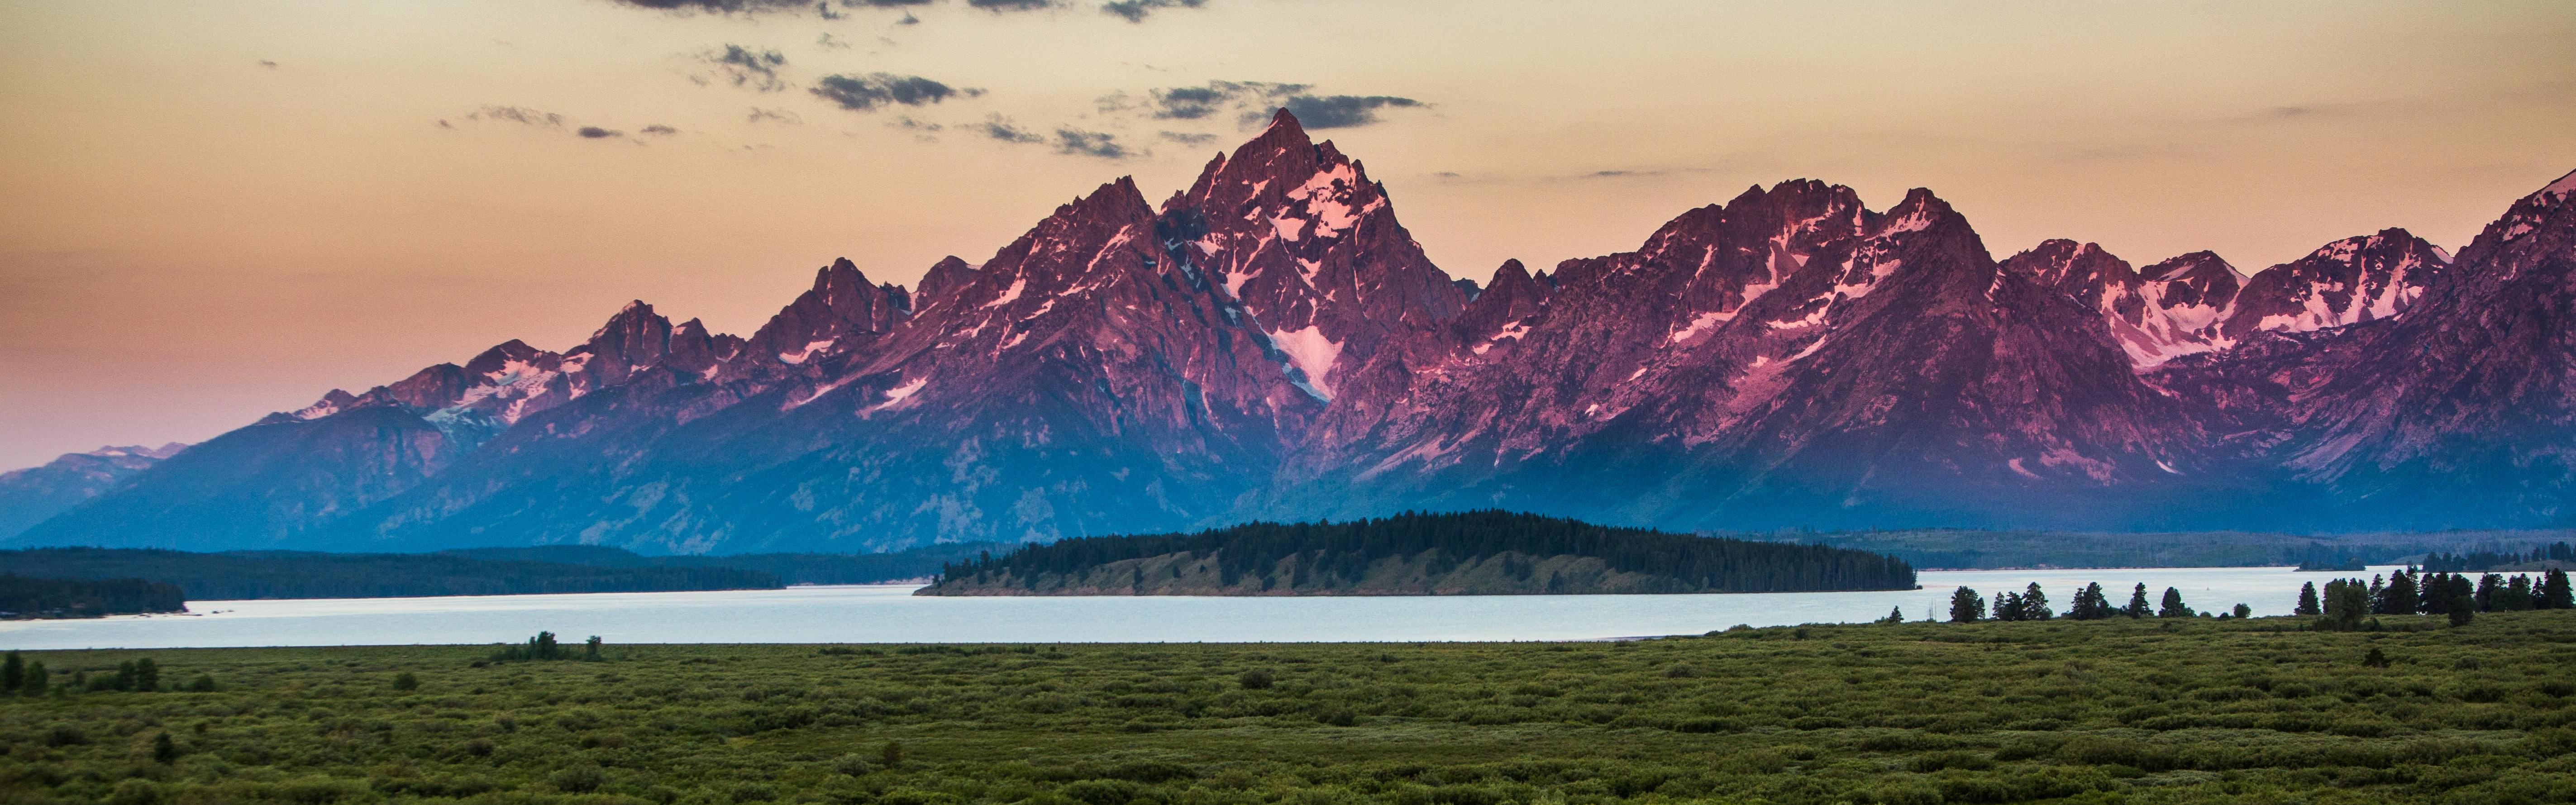 The view from Jackson Lodge, Grand Tetons National Park. There's an open meadow, a lake with an island beyond it, and the Grand Tetons in the distance, purple in the sunrise. 